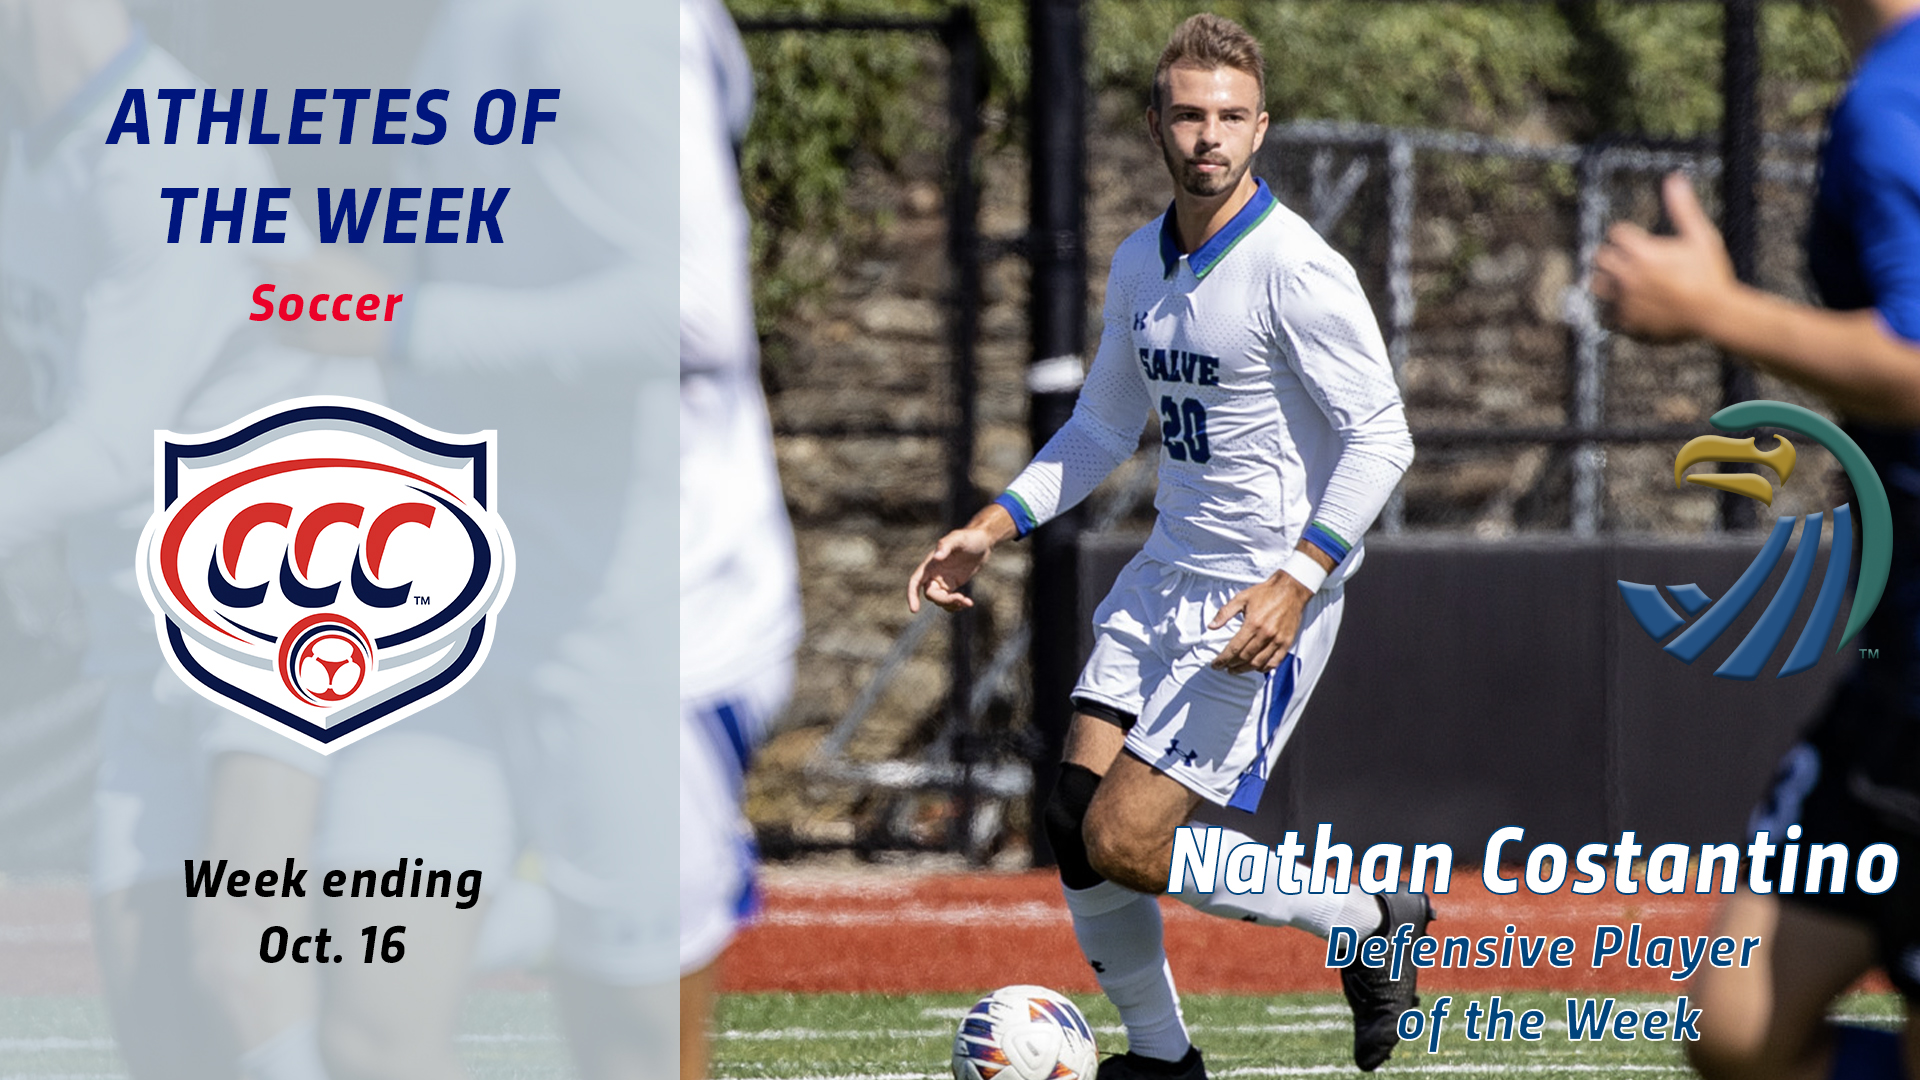 Nathan Costantino was named CCC Defensive Player of the Week.